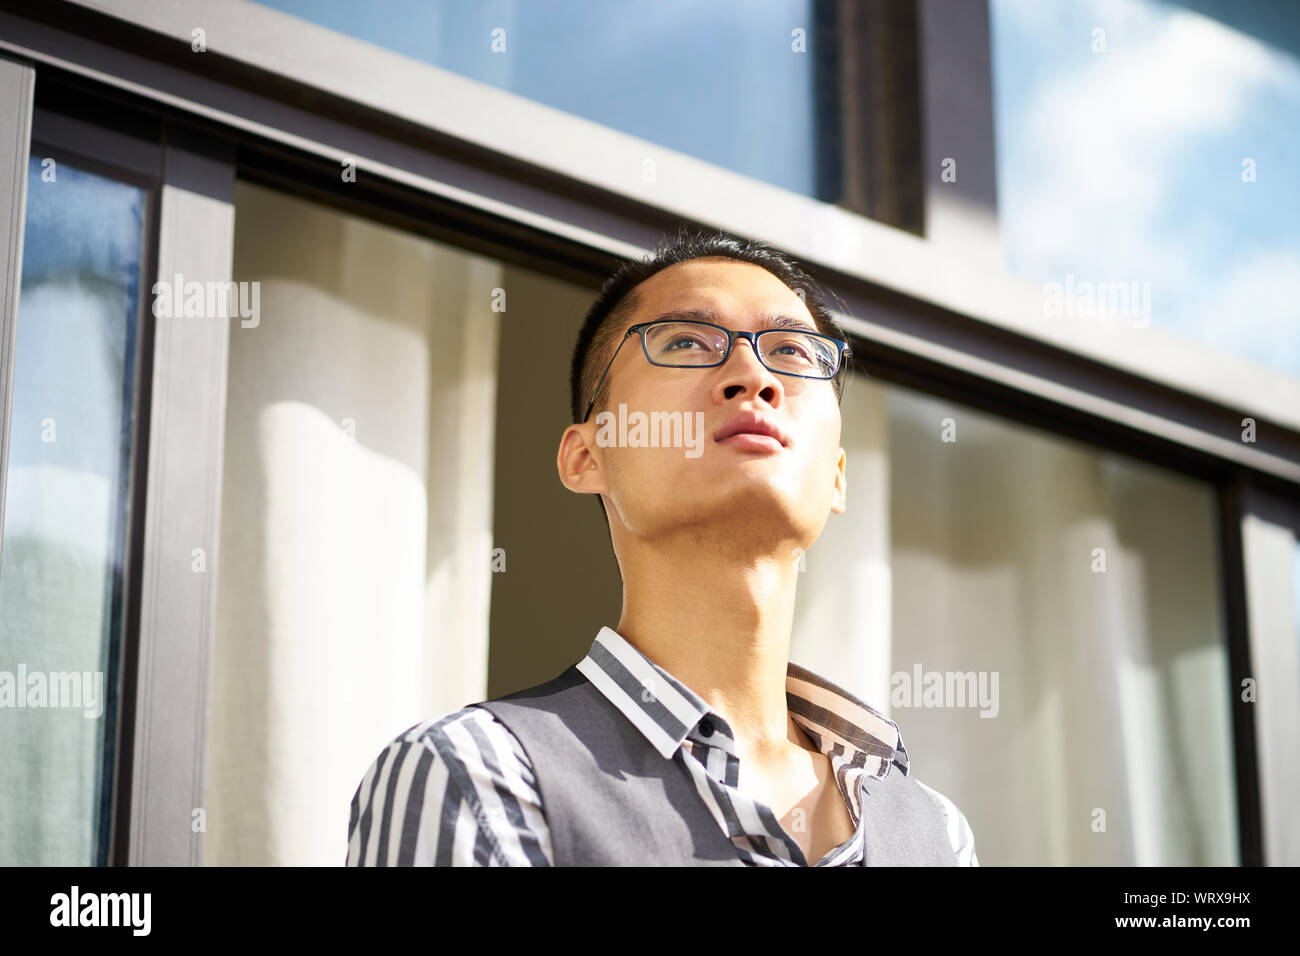 Young Asian man standing on patio looking at view Banque D'Images